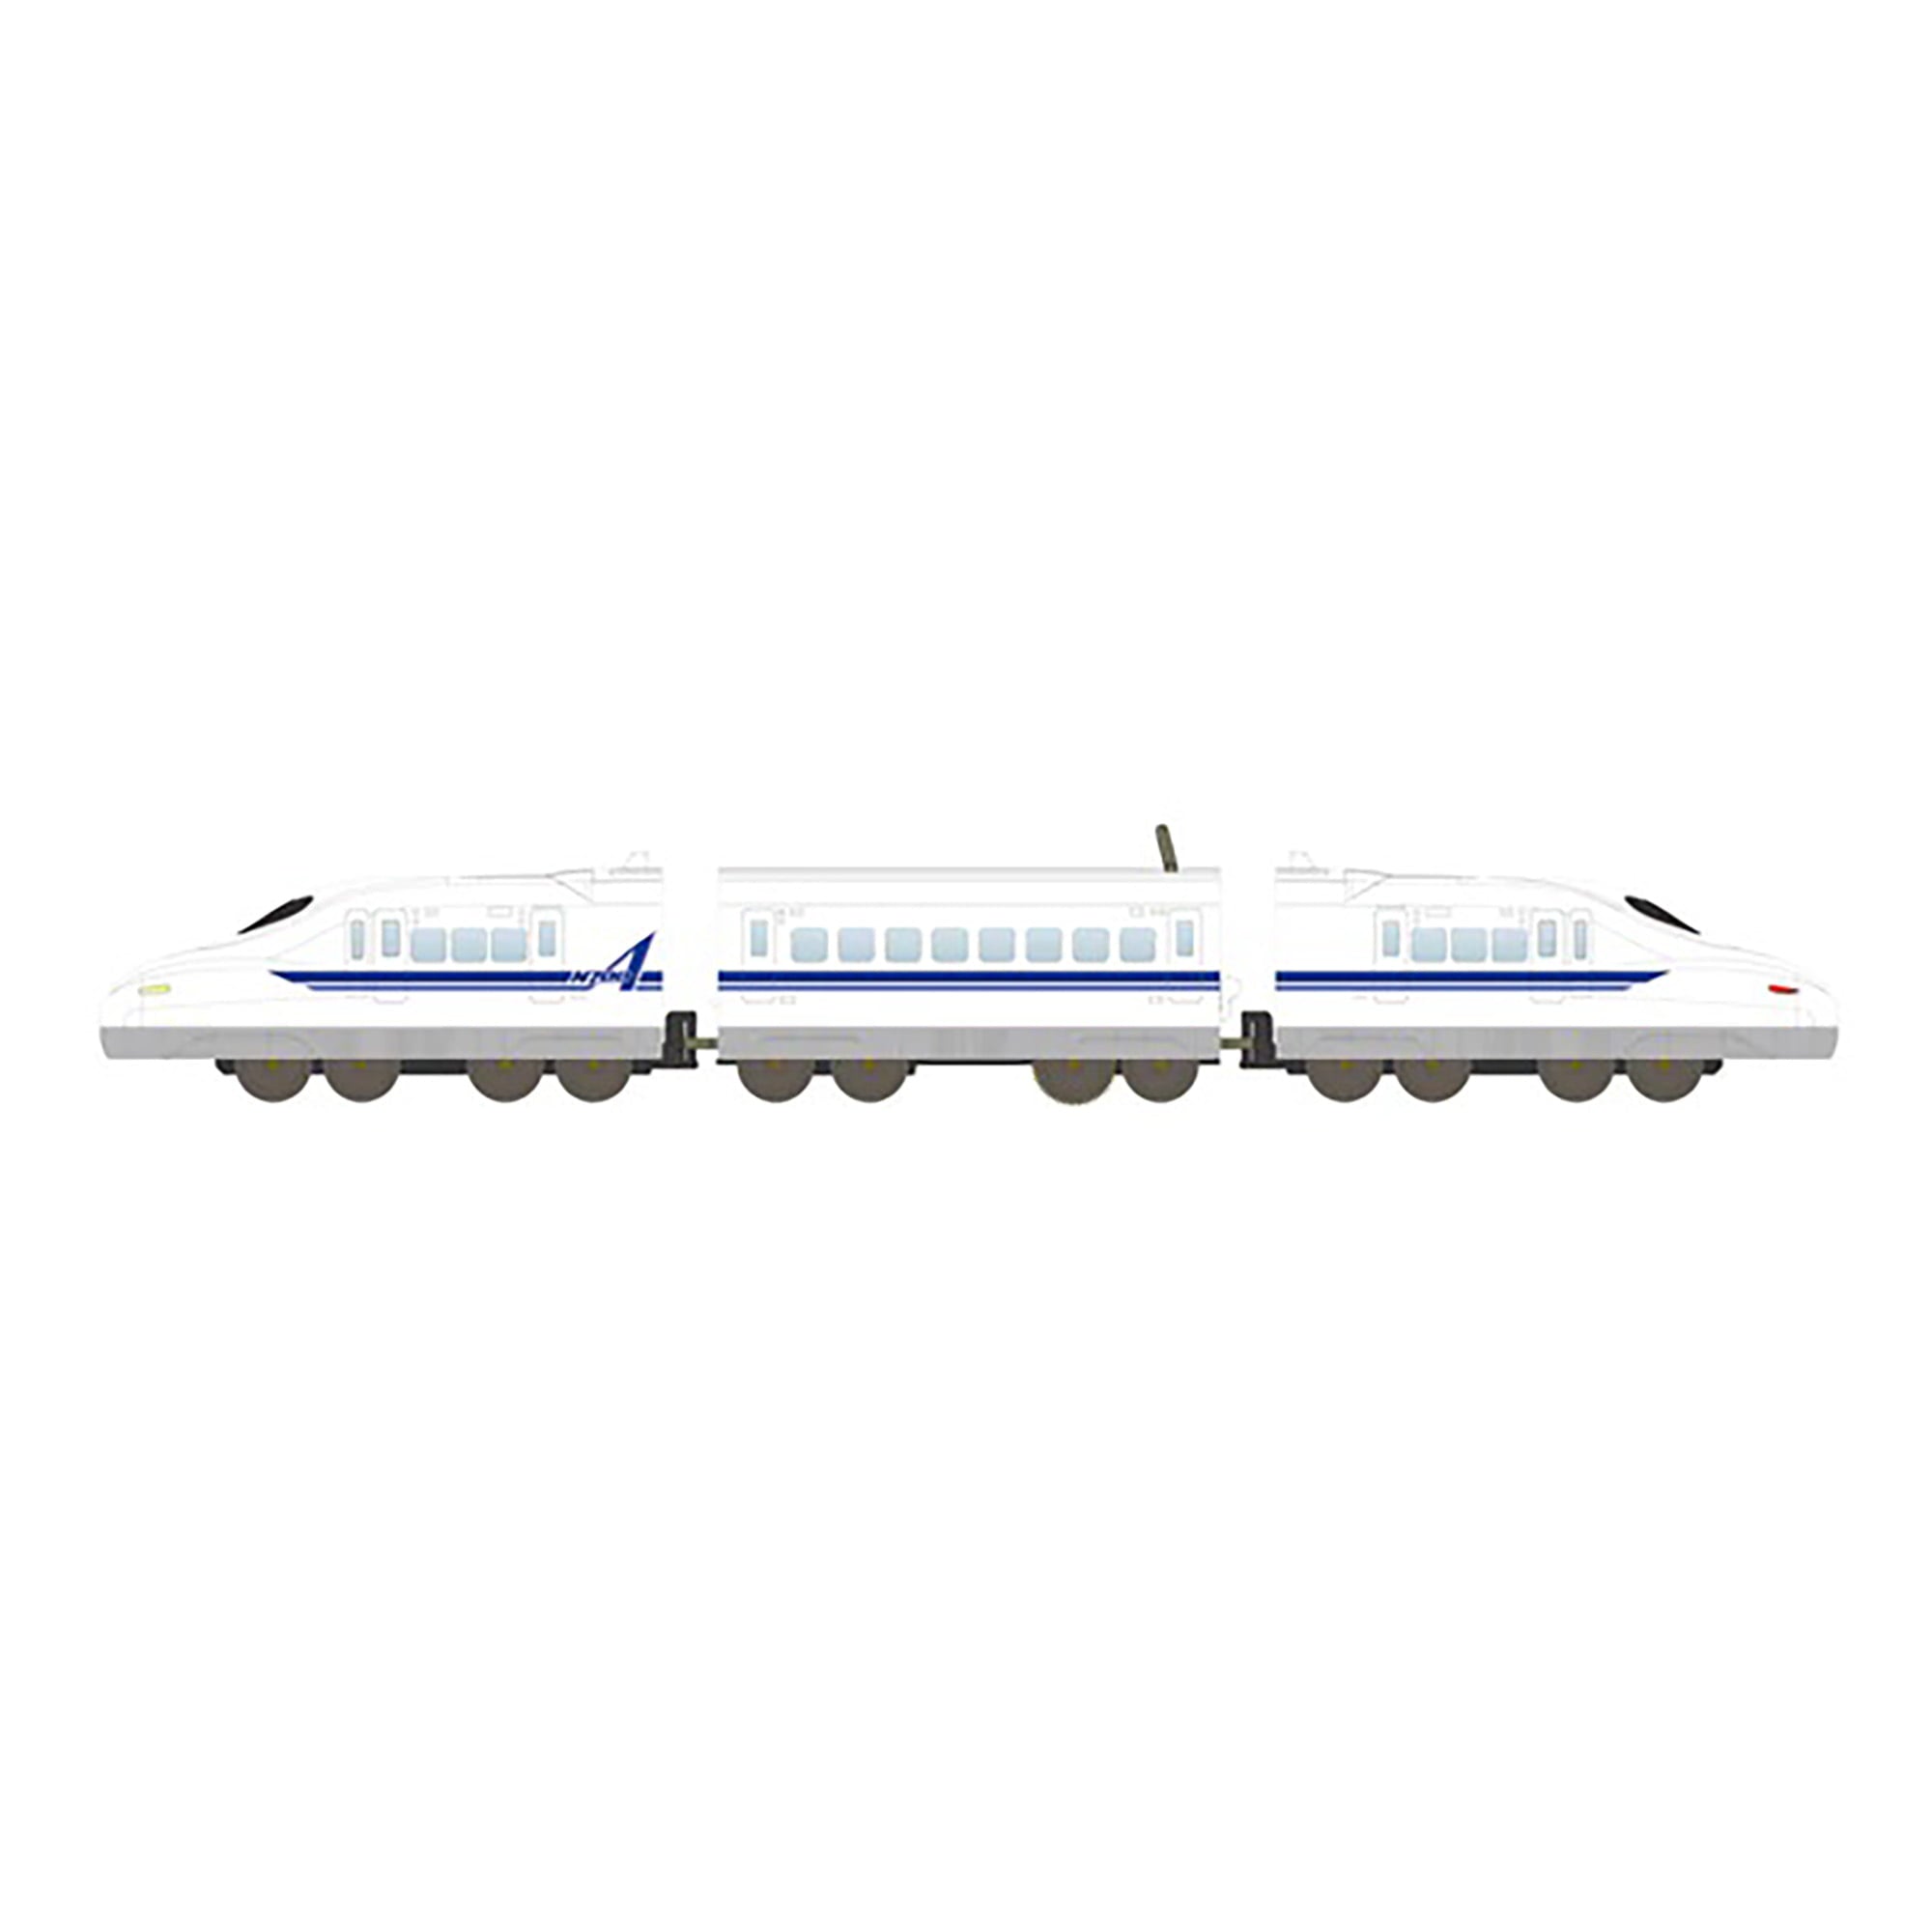 World Train Series: Collector's Edition Japanese Bullet Train - Shinkansen N700A - Battery Operated Train Set, Ages 3+, 6 Pack